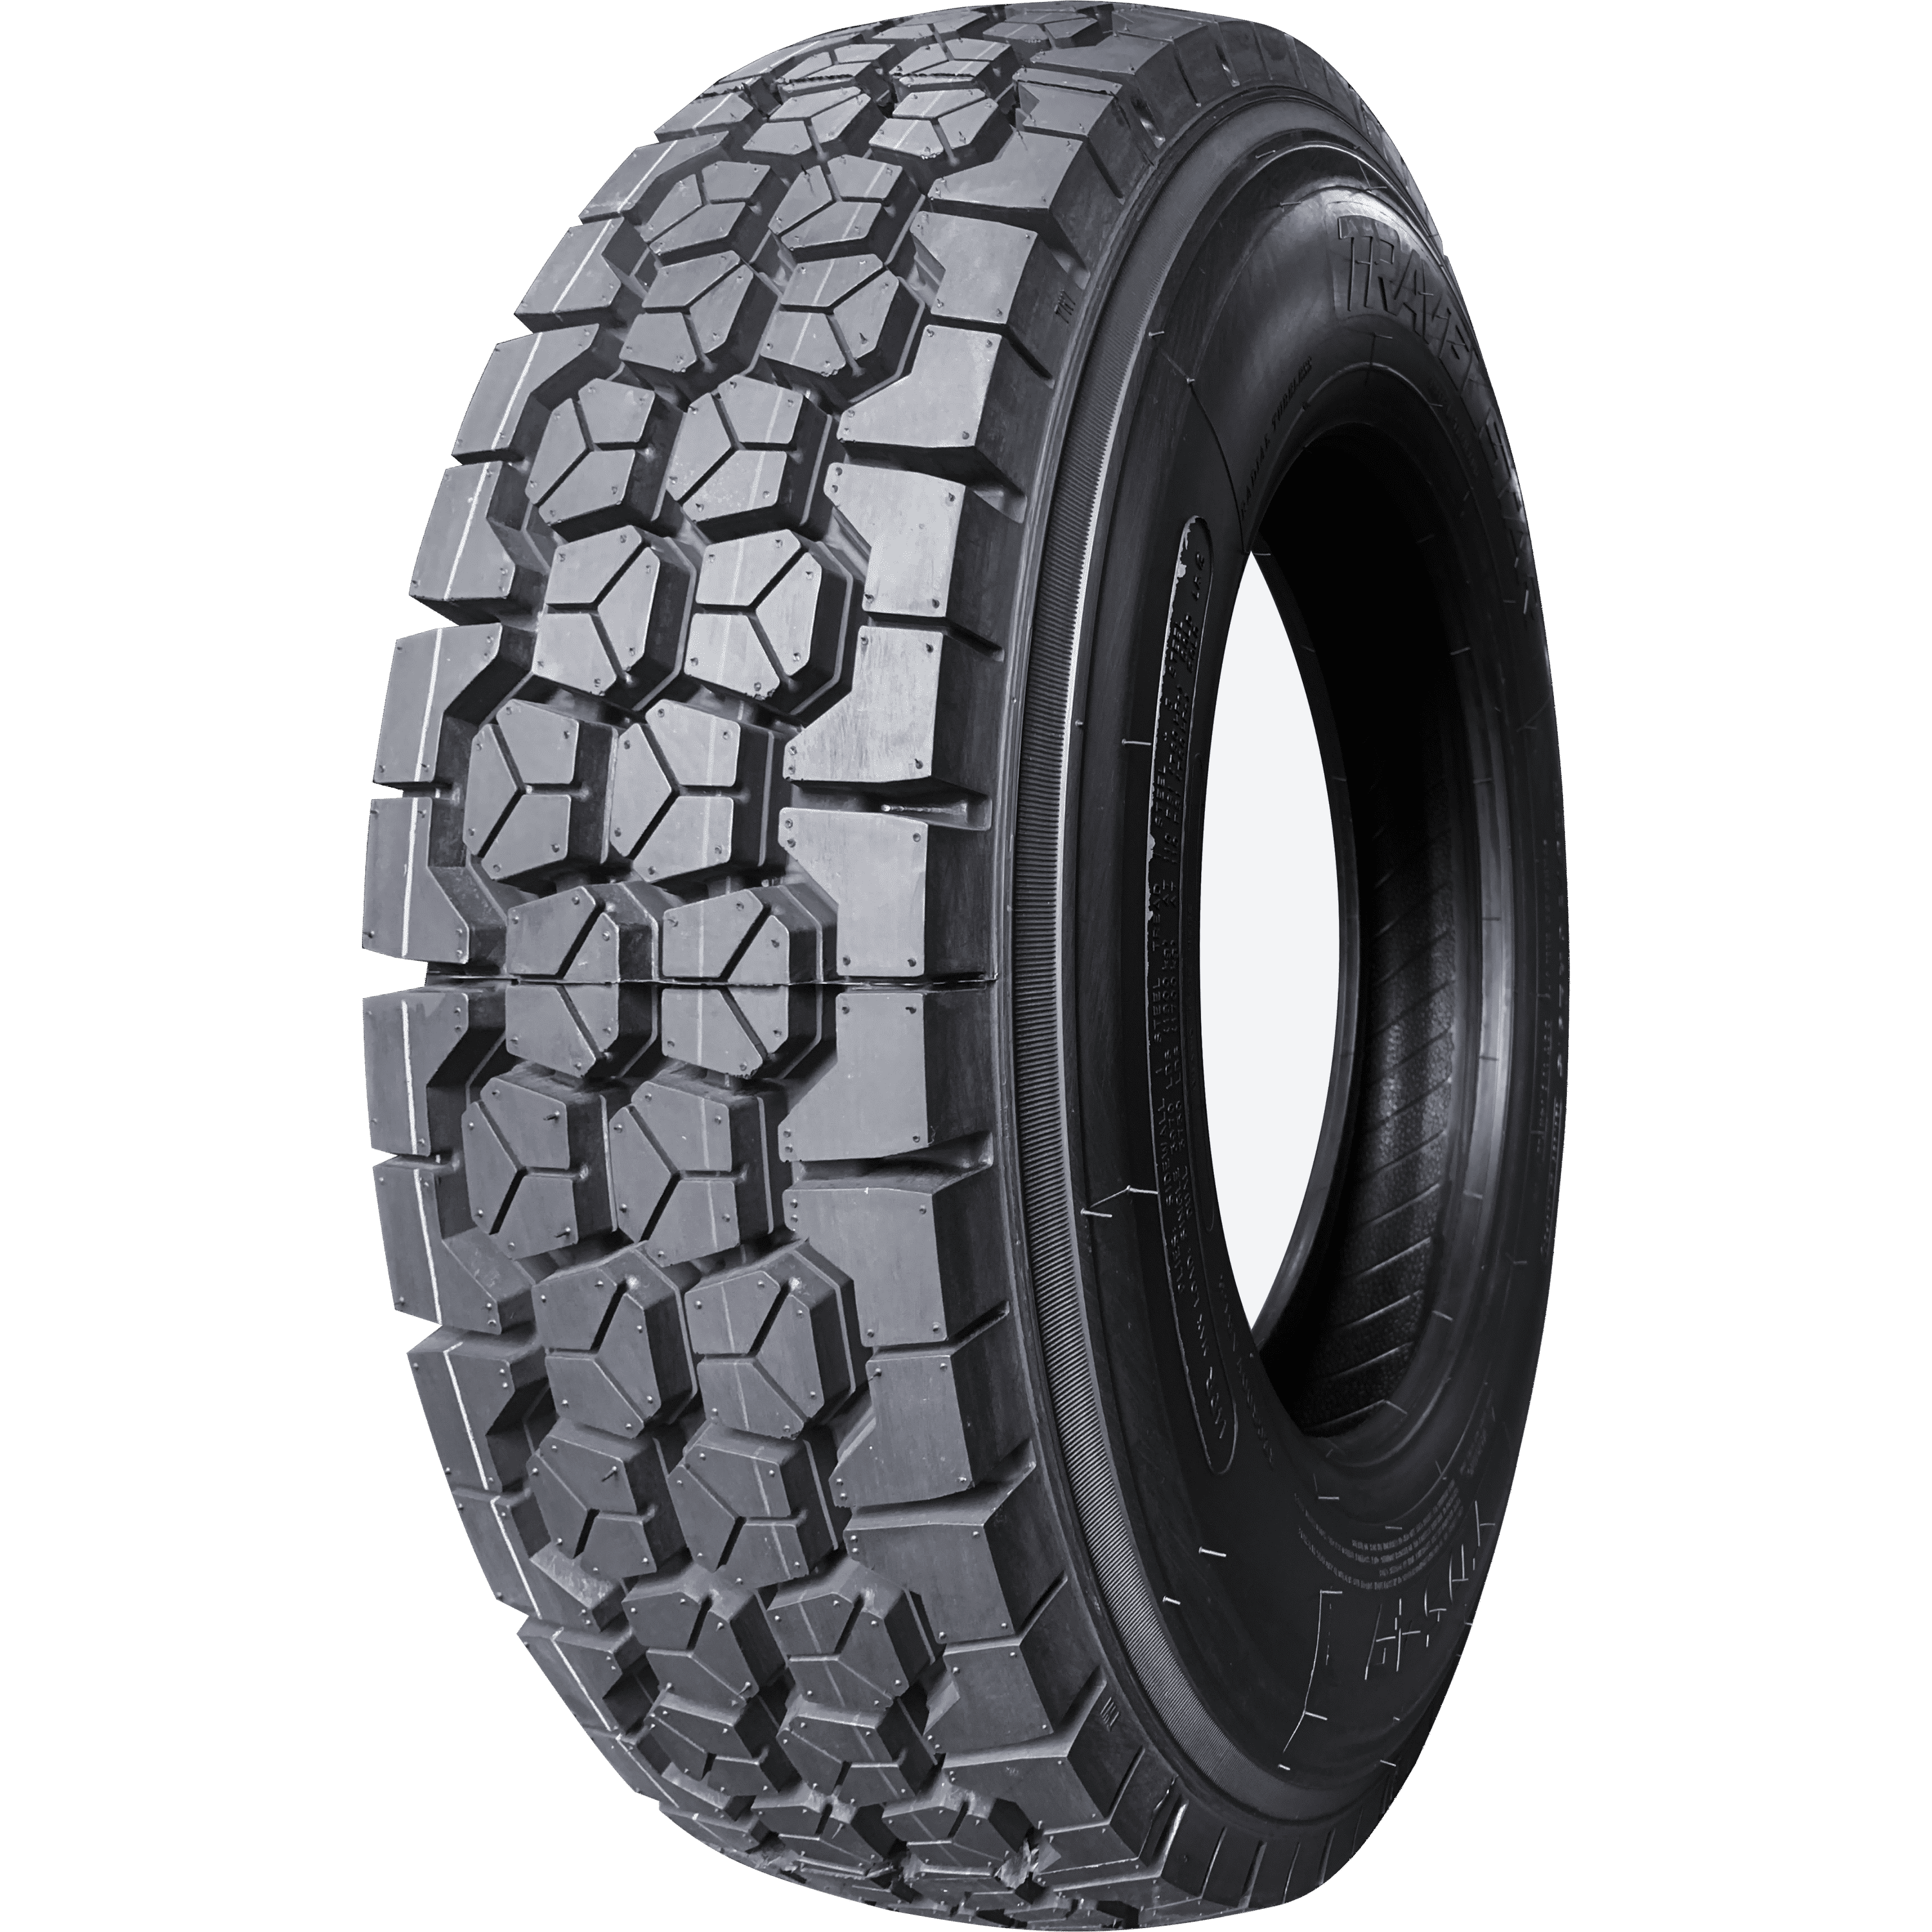 4-TIRES 11R24.5 ROAD CREW T810 STEER ALL POSITION NEW TIRES 14 PLY 146/143-M ONLY TO EAST COAST 